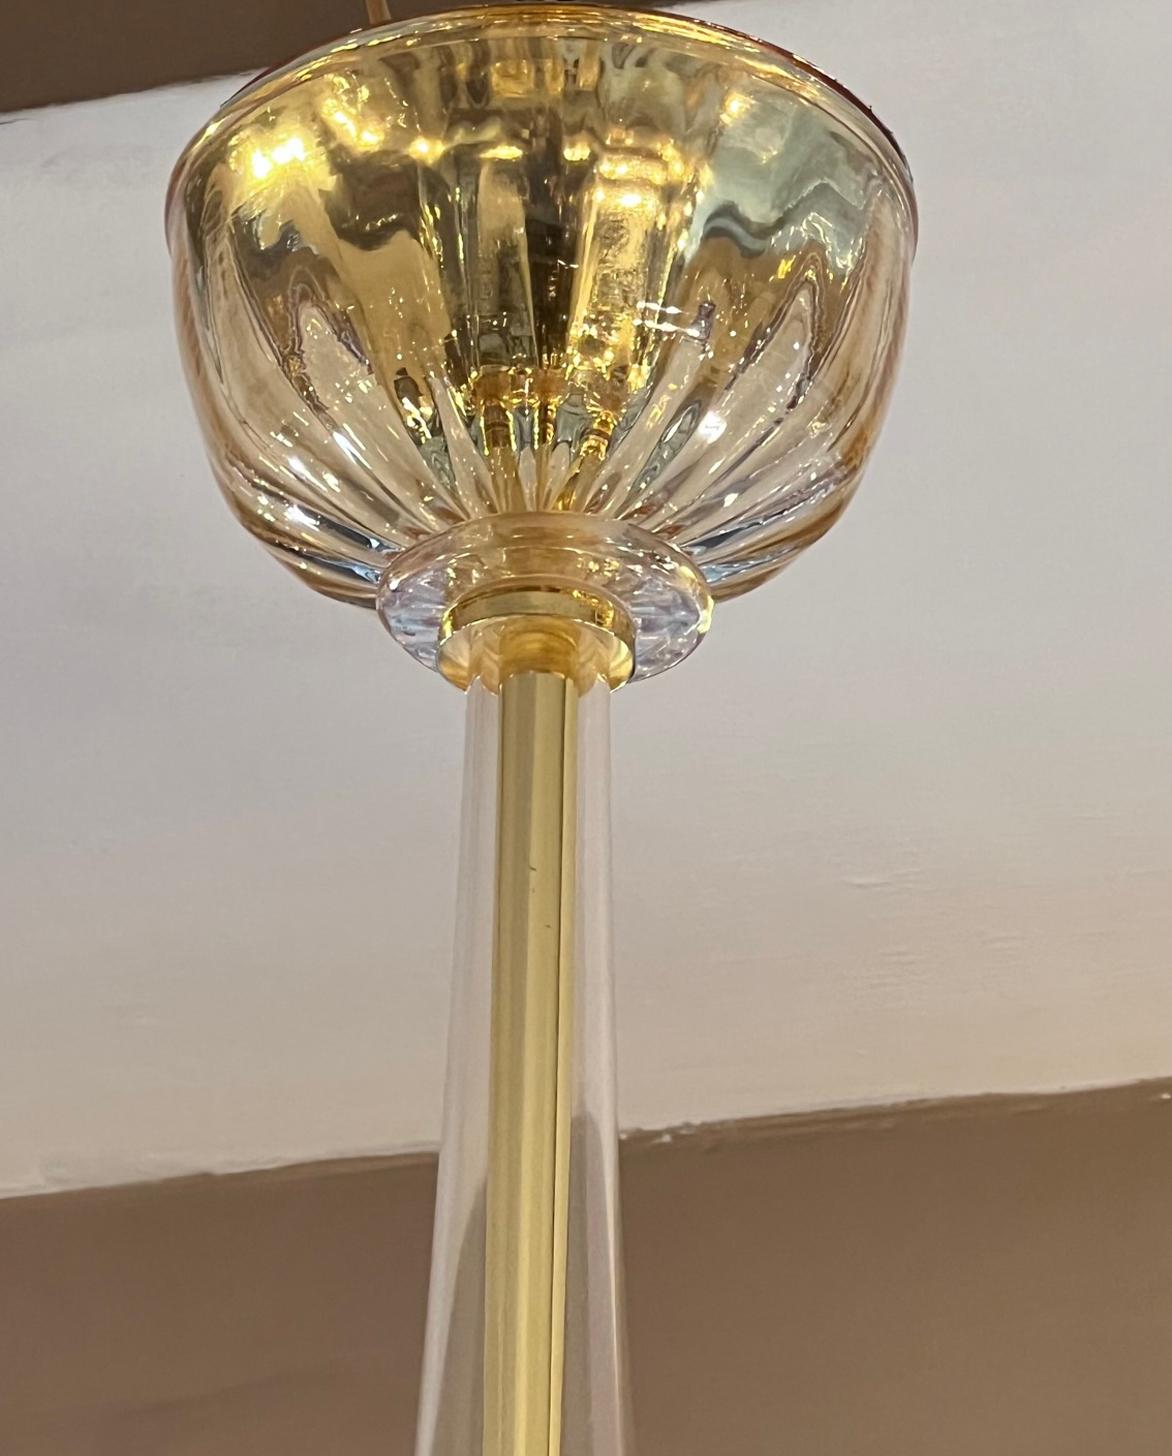 A circa 1960's Italian light amber and gold Murano chandeliers with 8 lights. 

Measurements:
Min. drop: 40